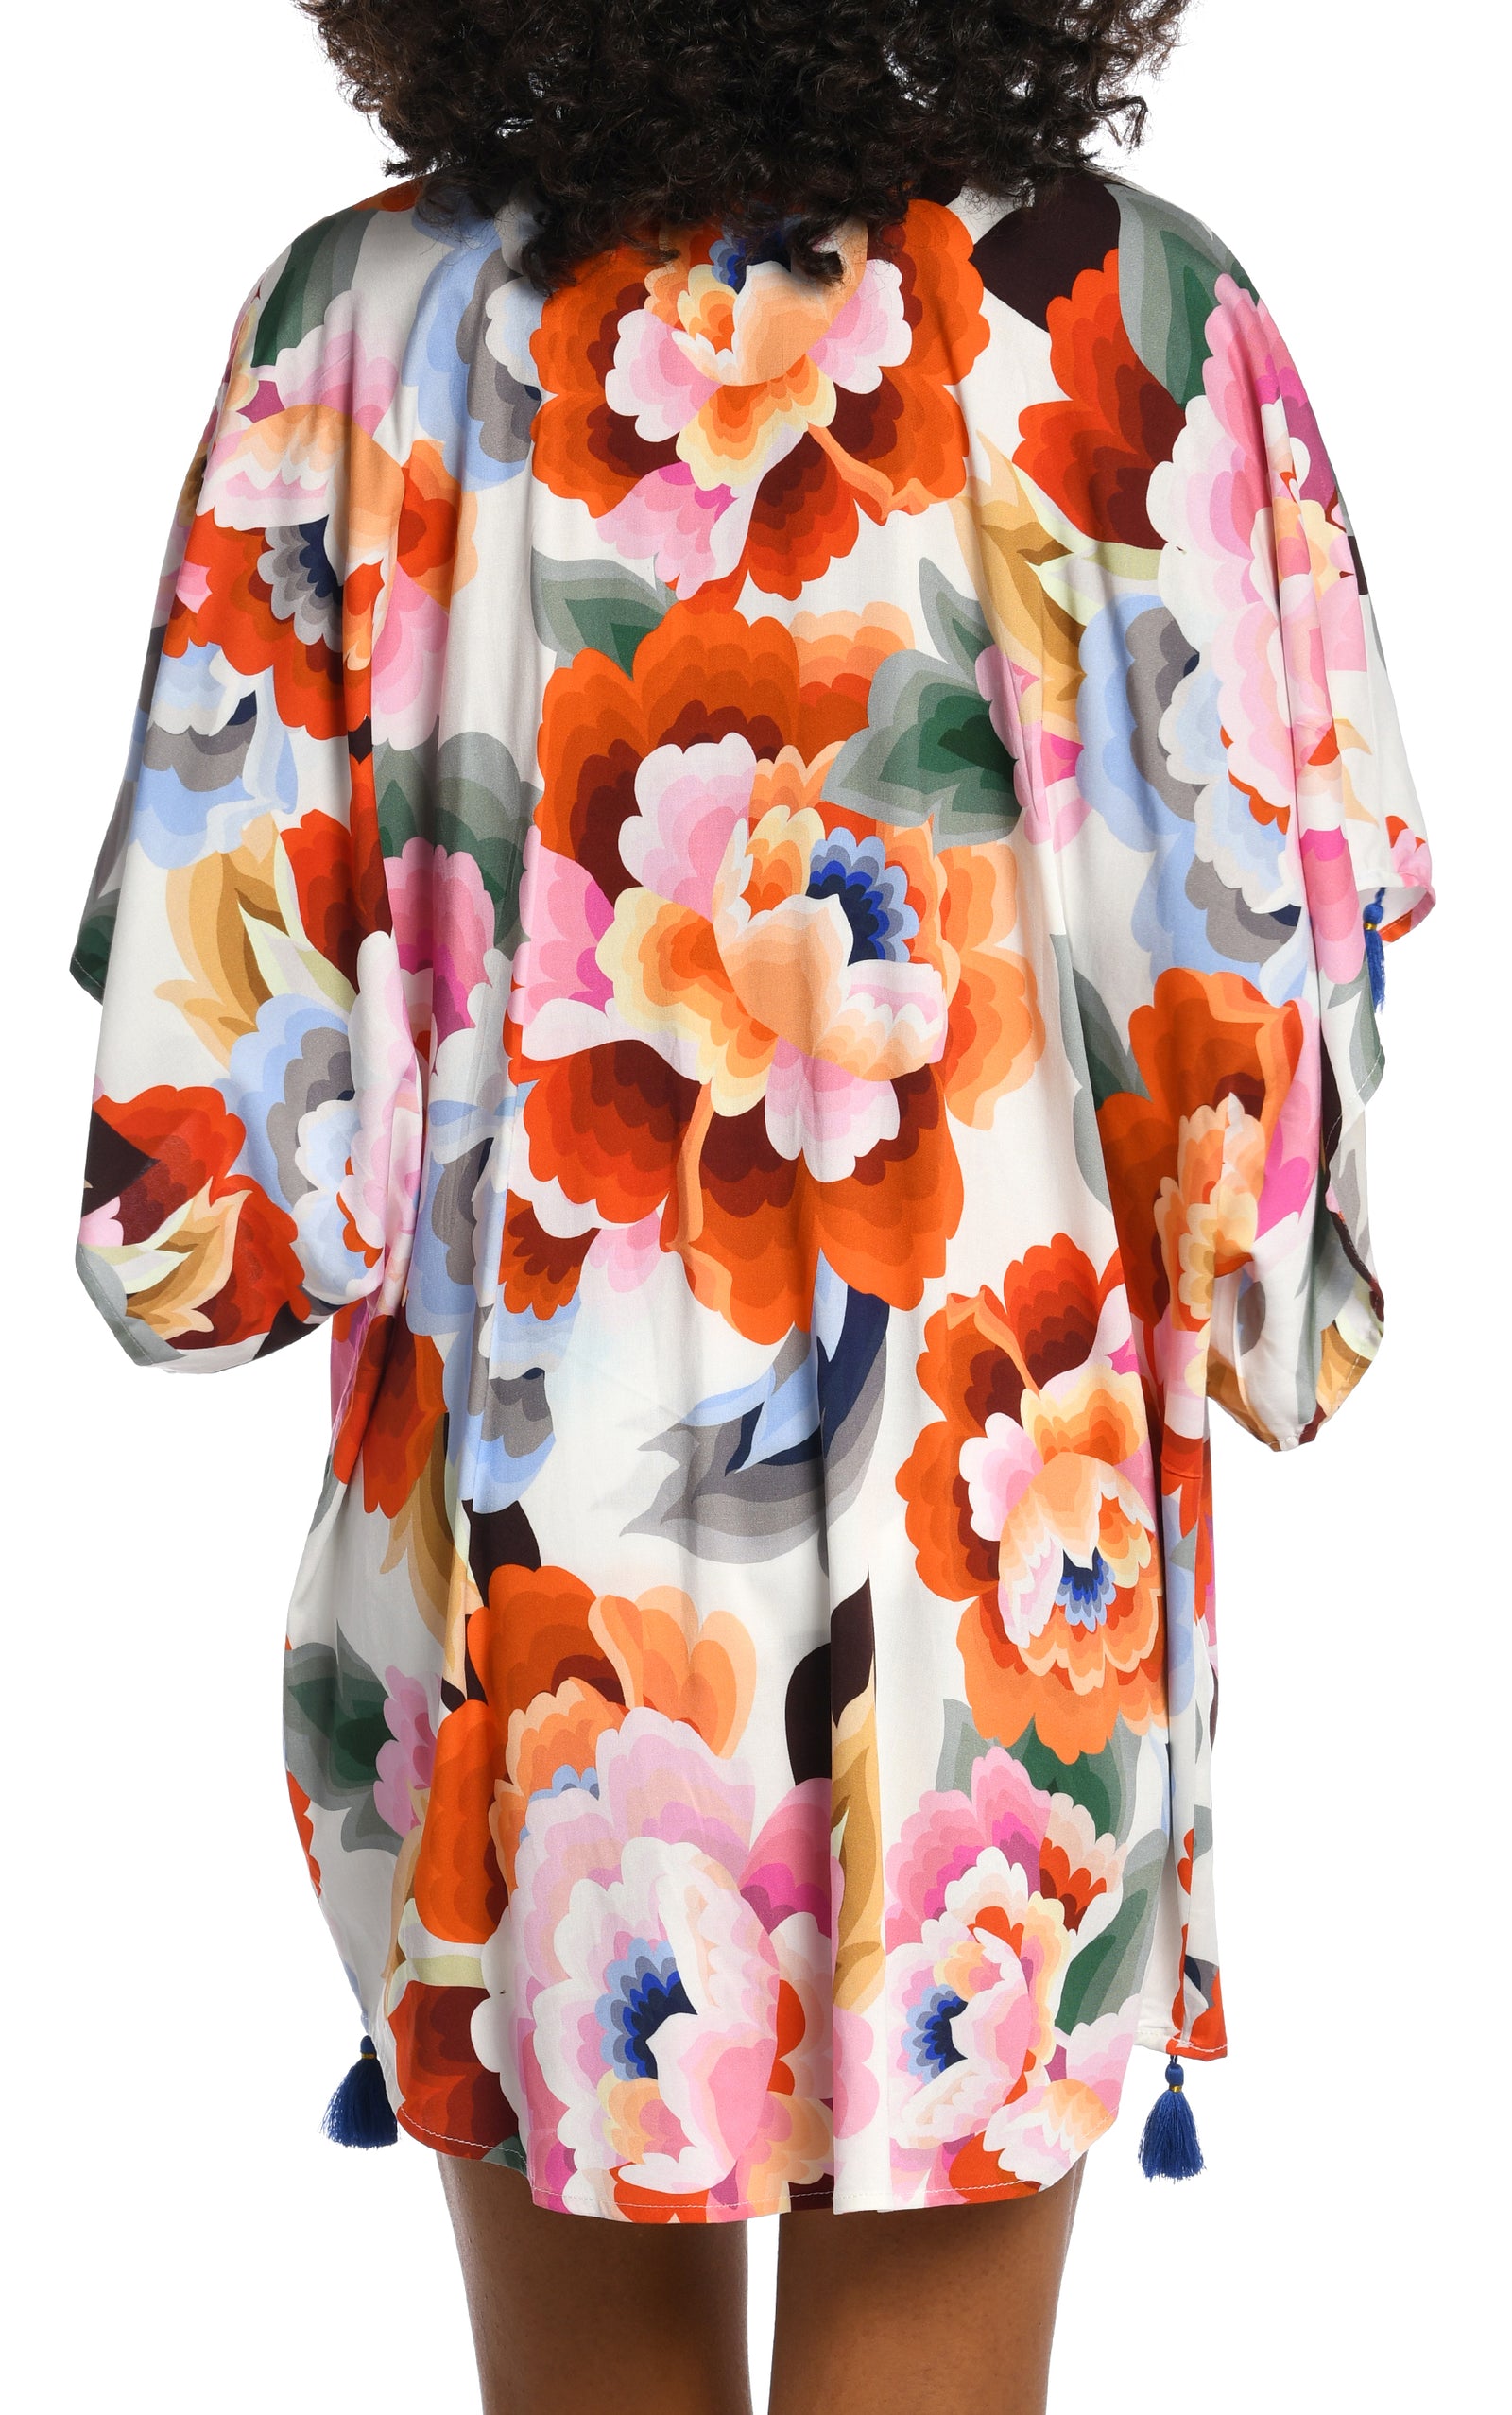 Floral Rhythm Collection  Kimono with Sapphire Tassels  One Size   Fabric Content: 100% Rayon Crepe   Product#: LB3VE63